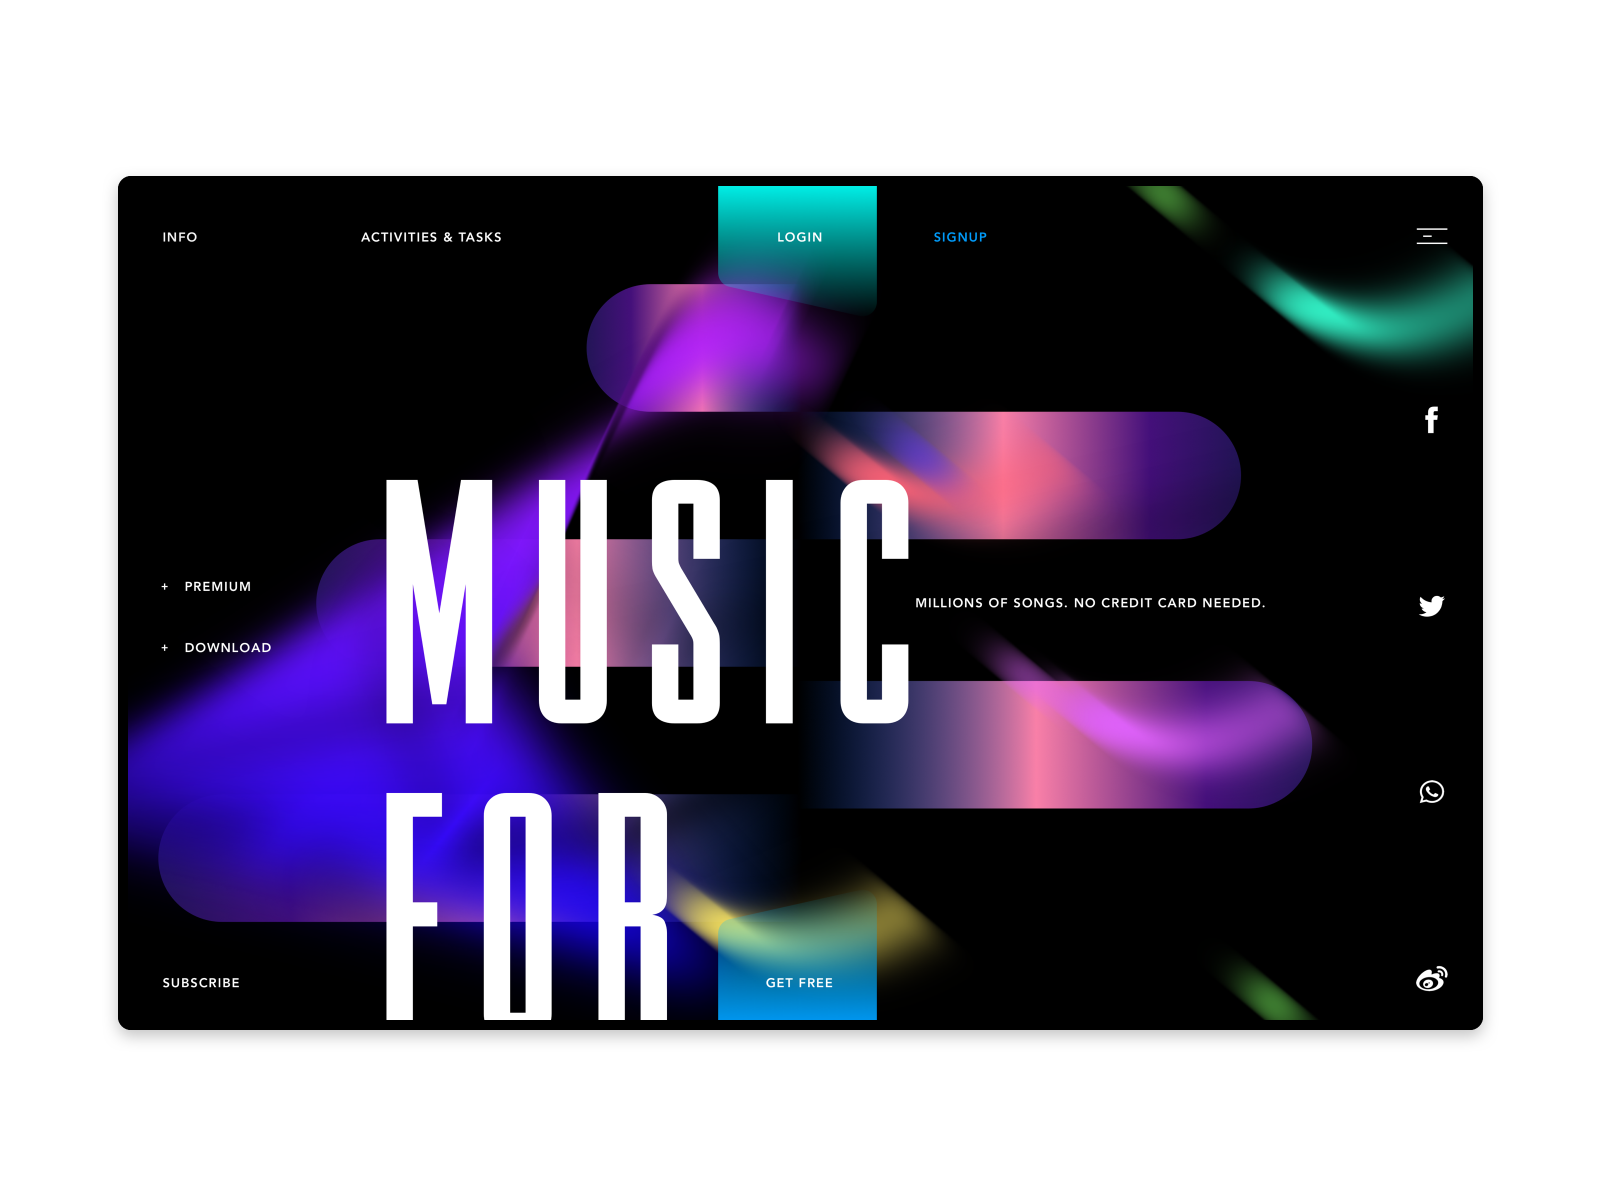 Music for everyone by Lopznyko on Dribbble